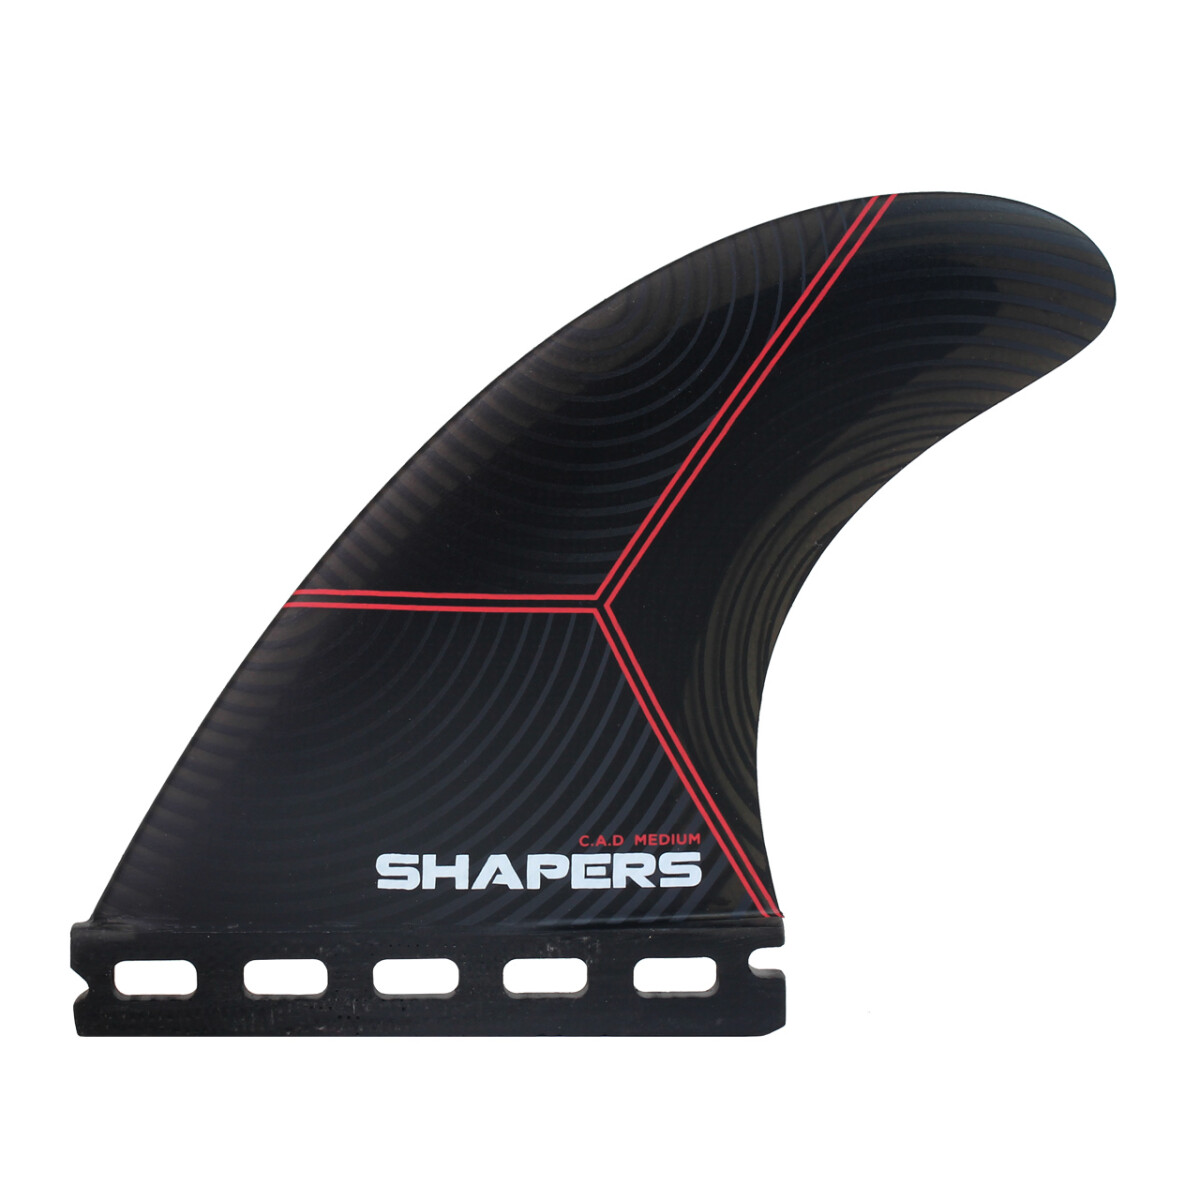 Quilla Shapers C.A.D. AIRLITE Futures M 